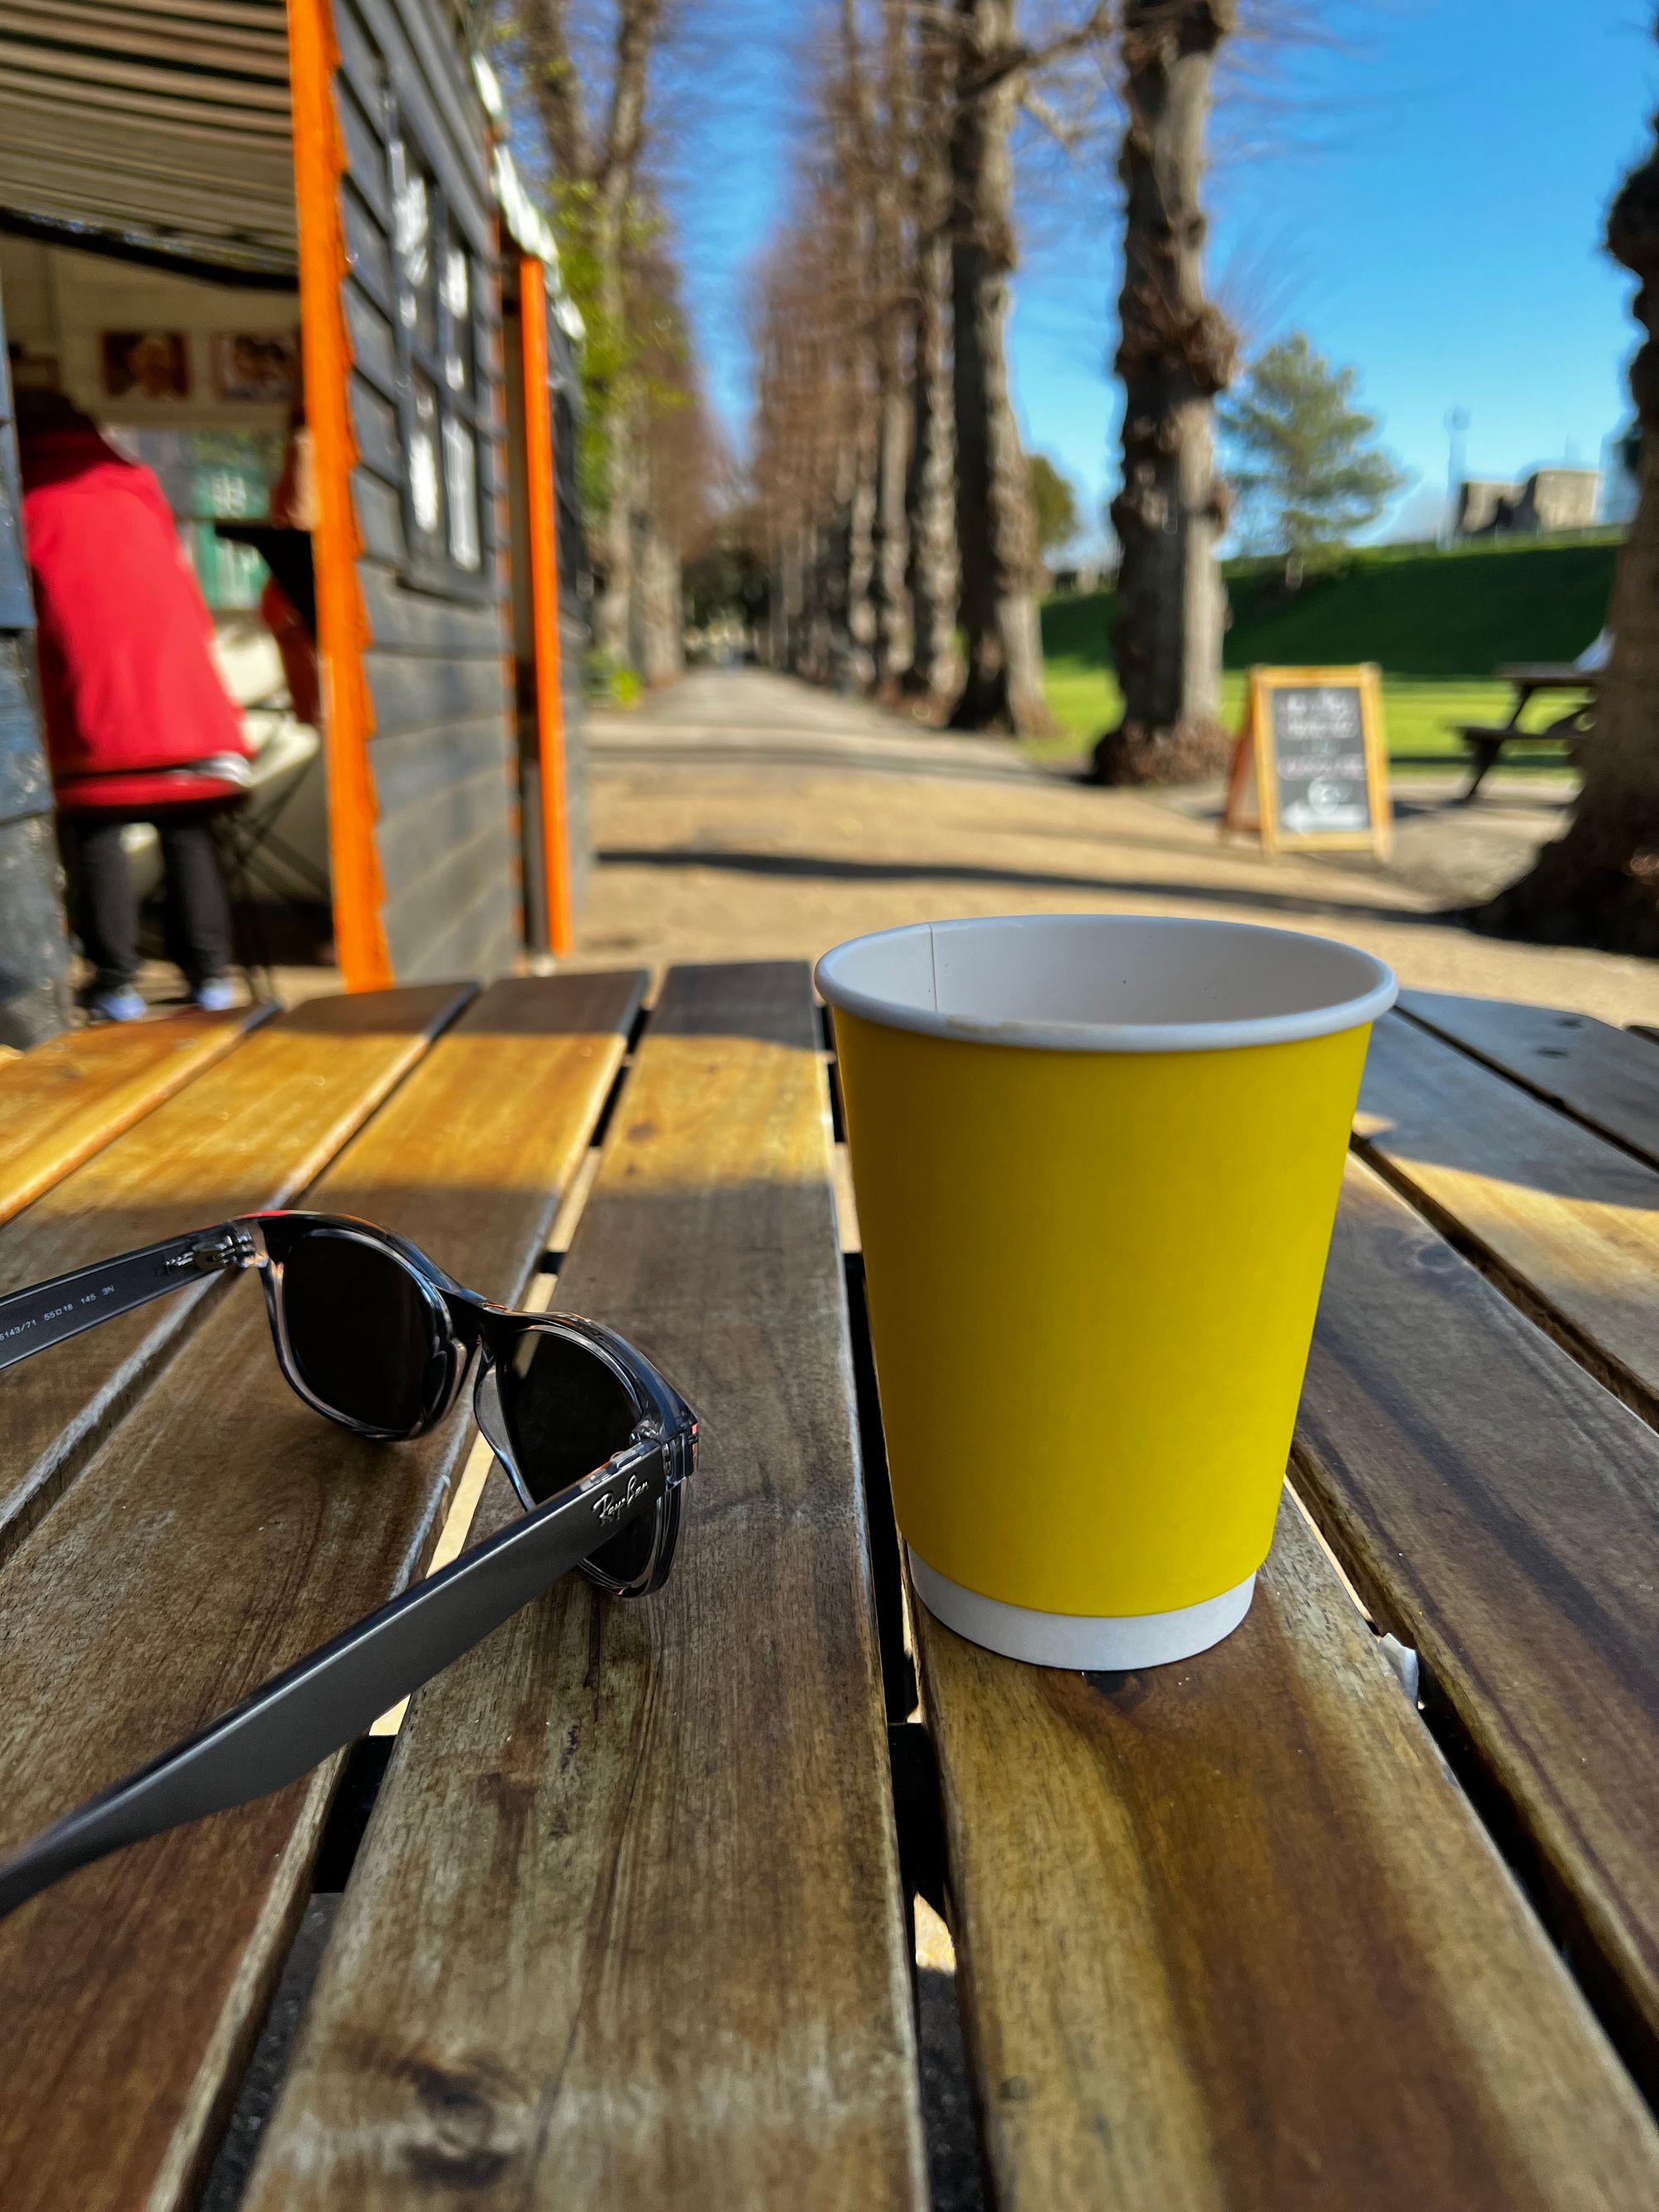 A pair of sunglasses and a yellow takeaway coffee cup on a park table, with a tree-lined avenue and a park café hut.